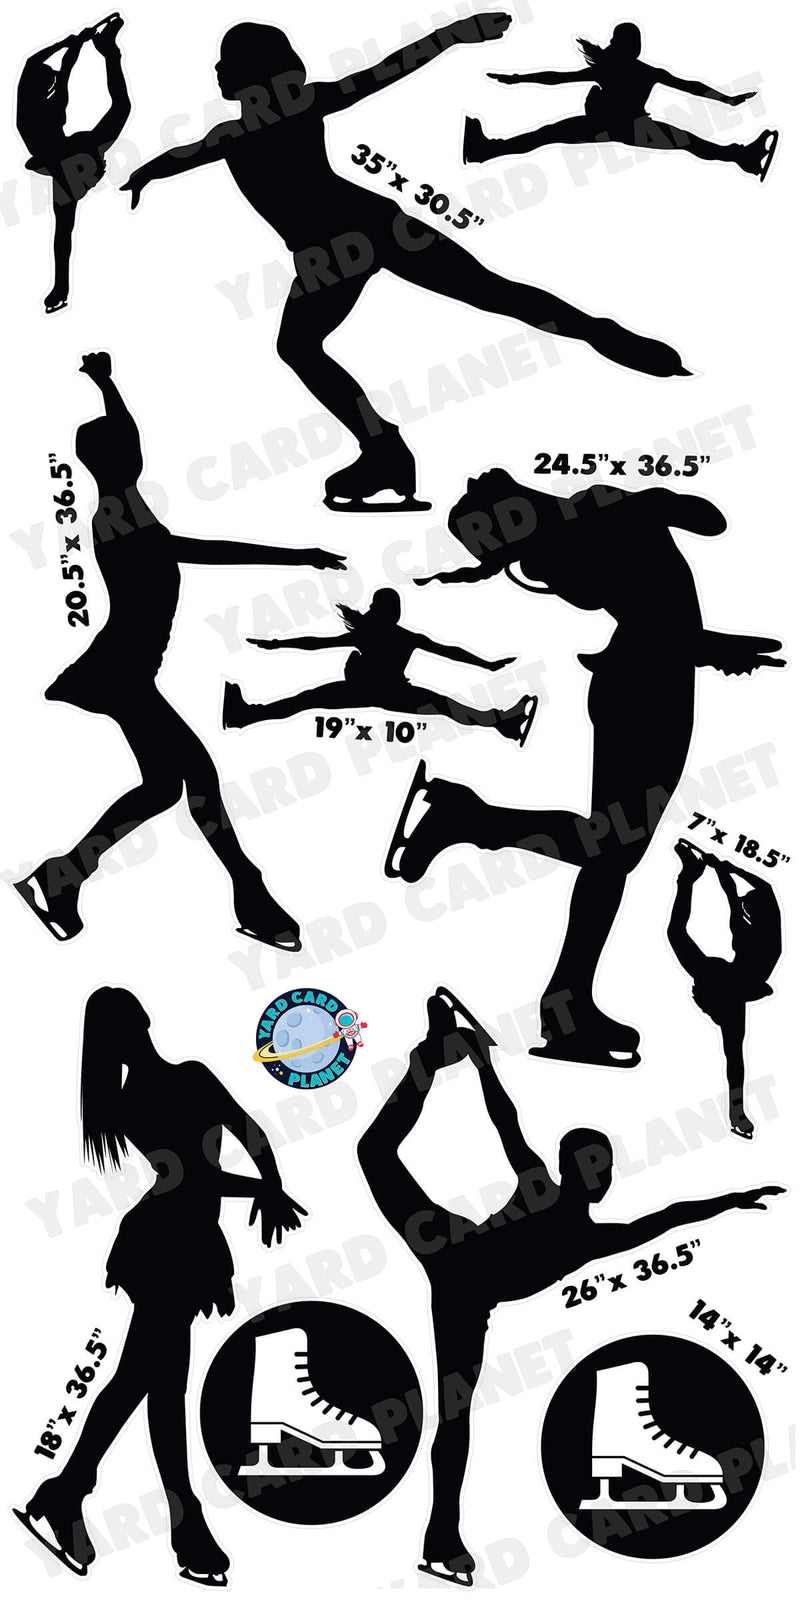 Figure Skating Silhouette Yard Card Flair Set with Measurements